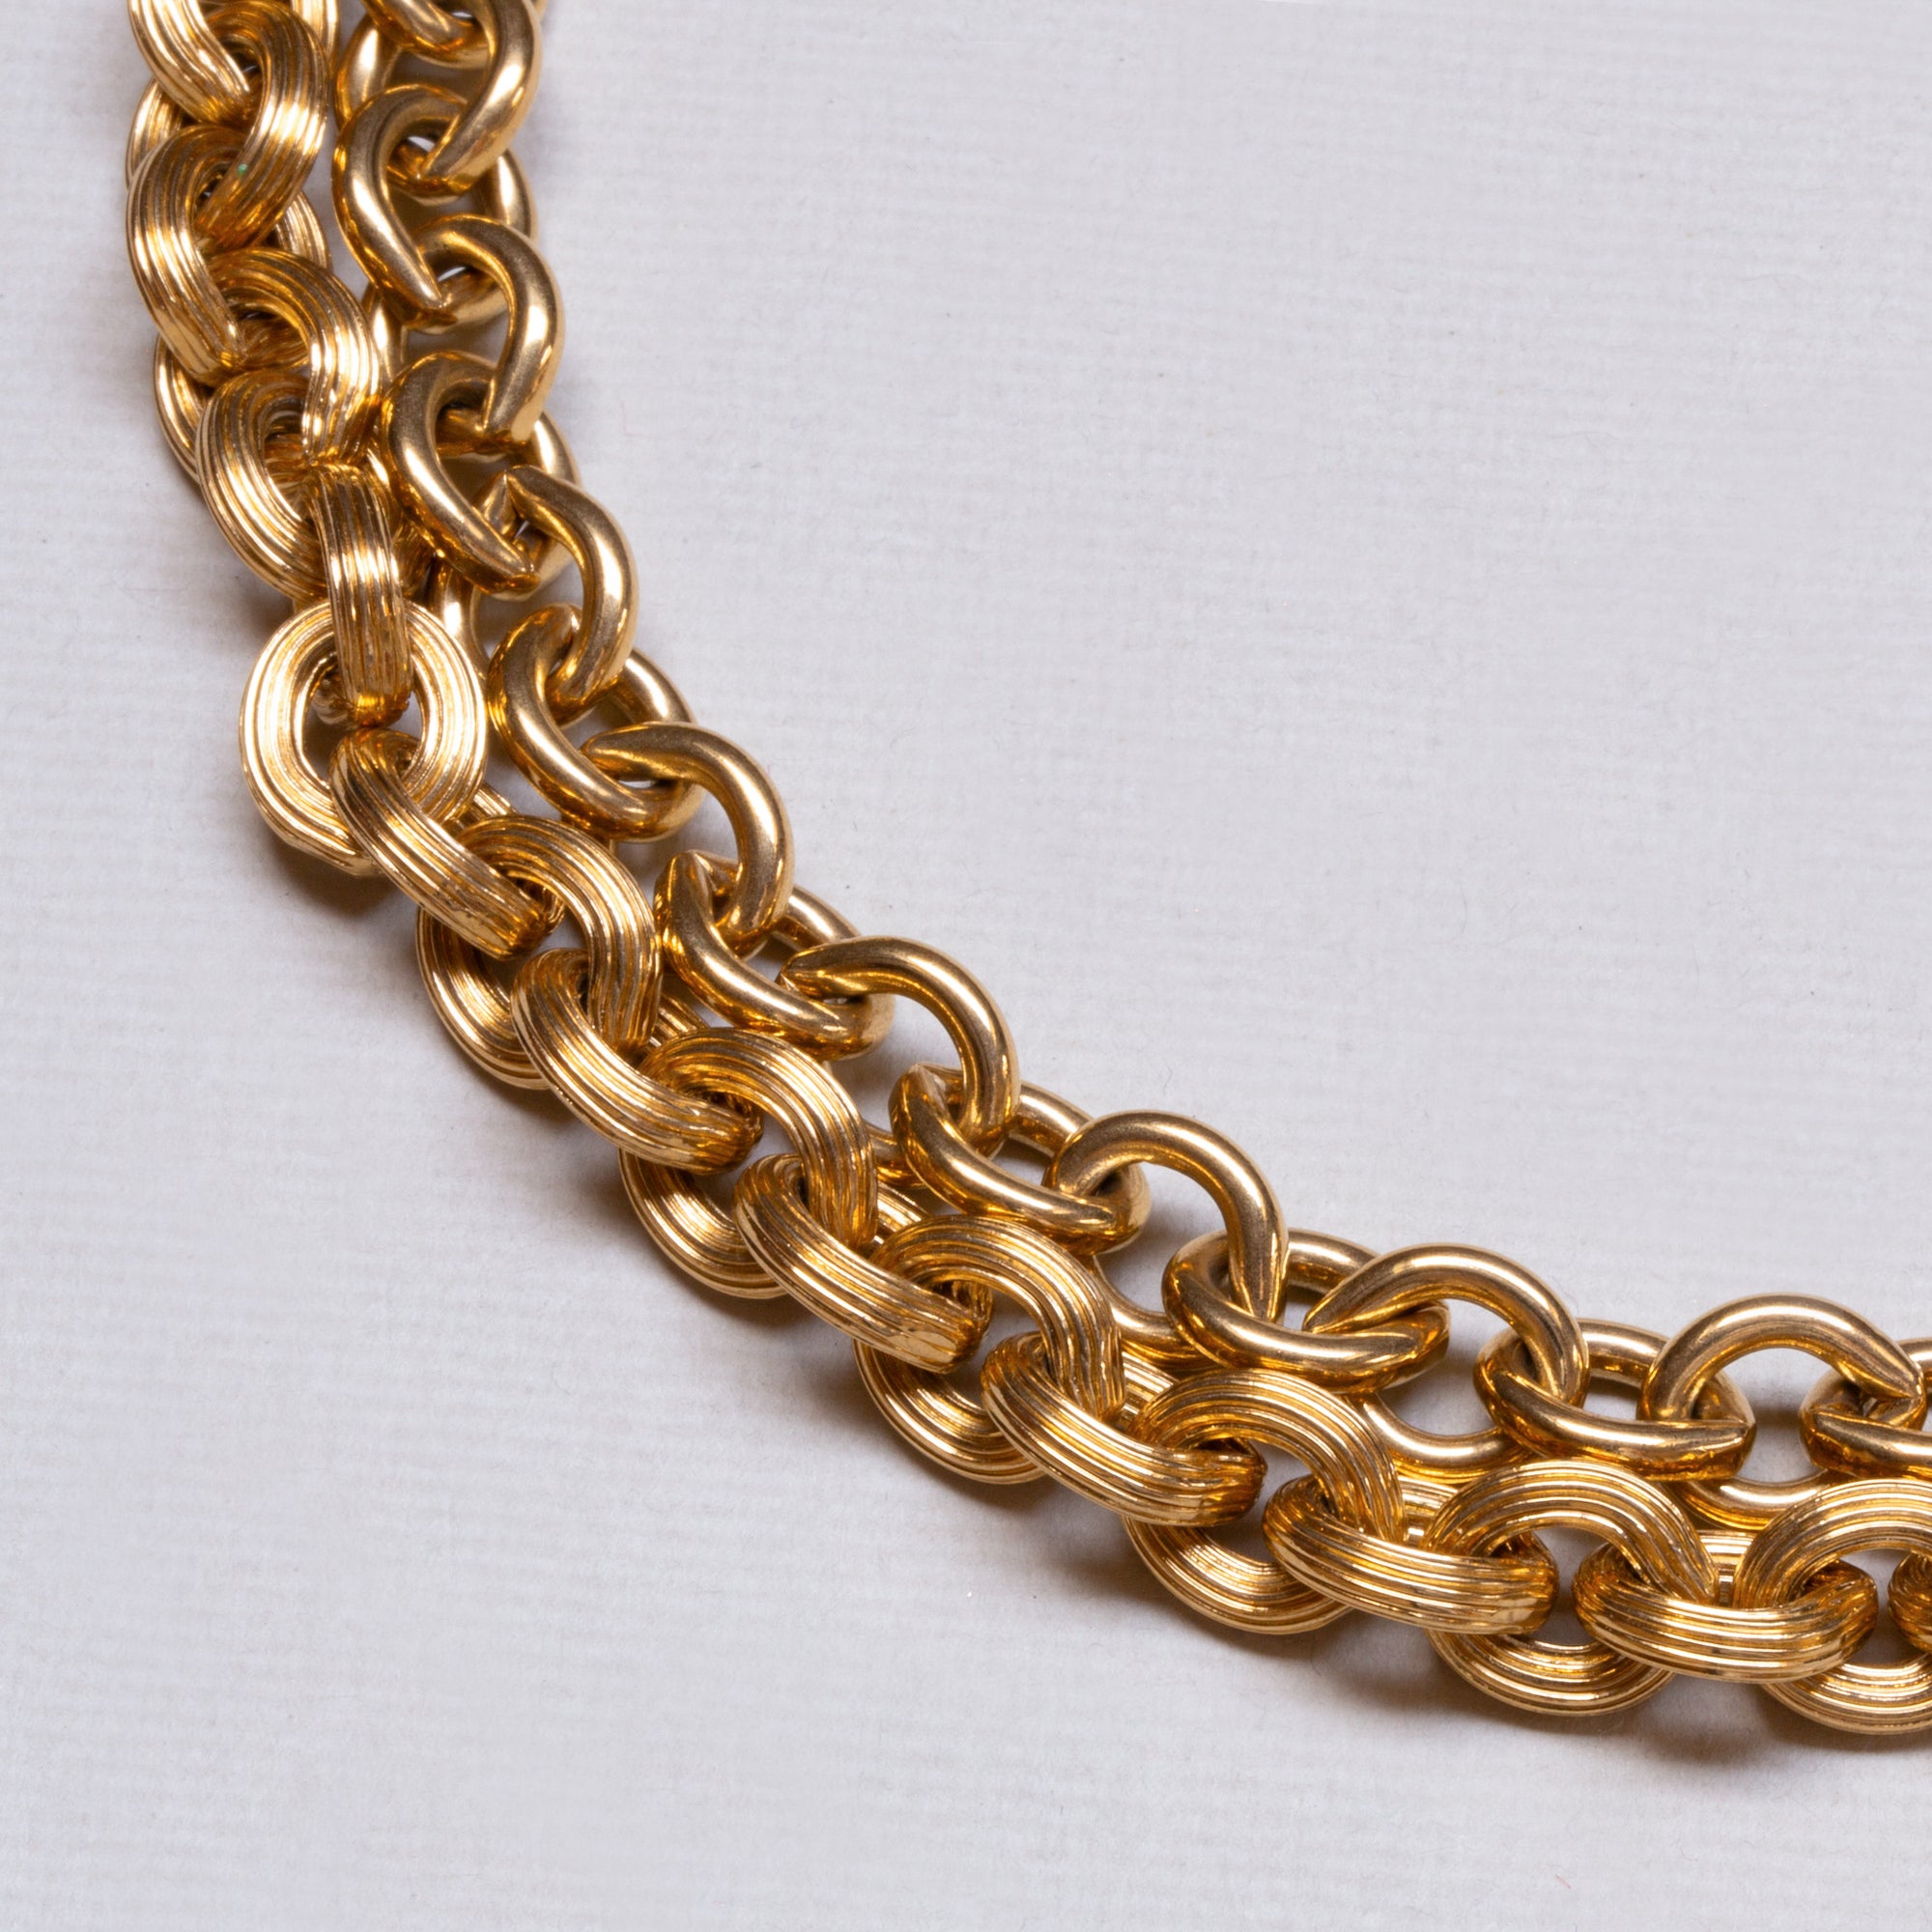 Vintage Givenchy Double Strand Gold Chain Necklace